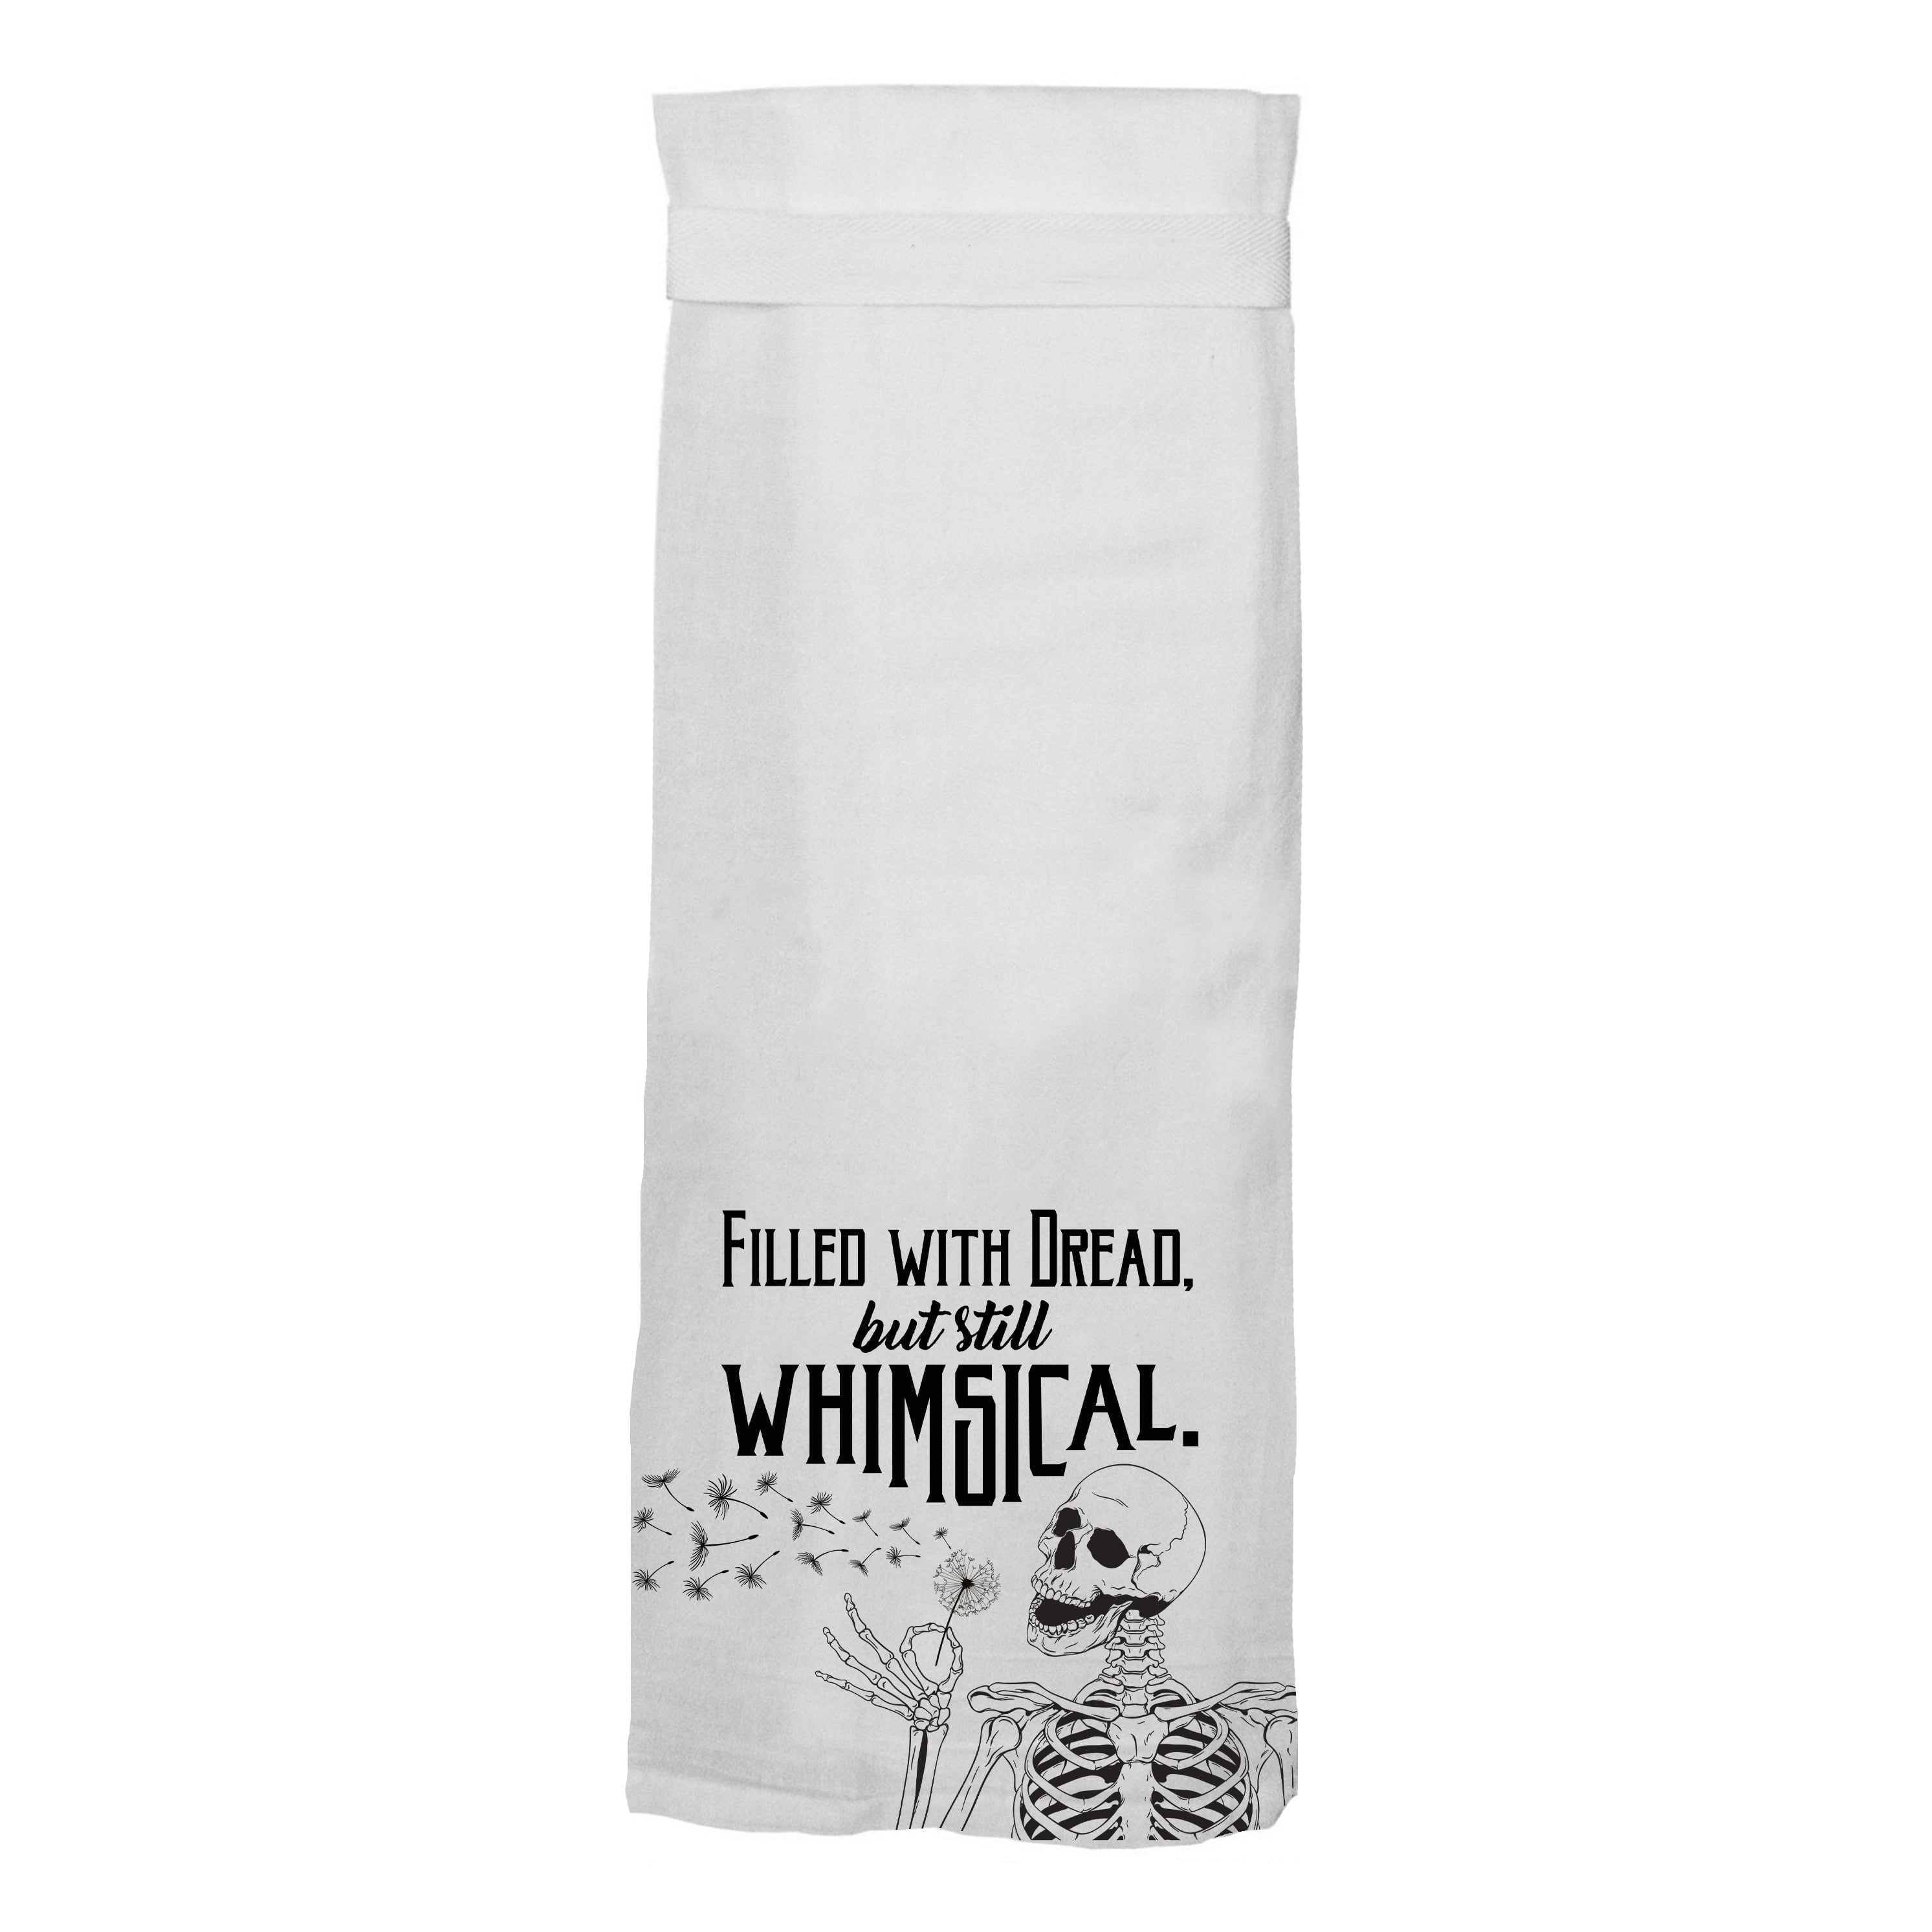 Funny Wholesale Kitchen Towels, Twisted Wares, With A Fuck Fuck Here